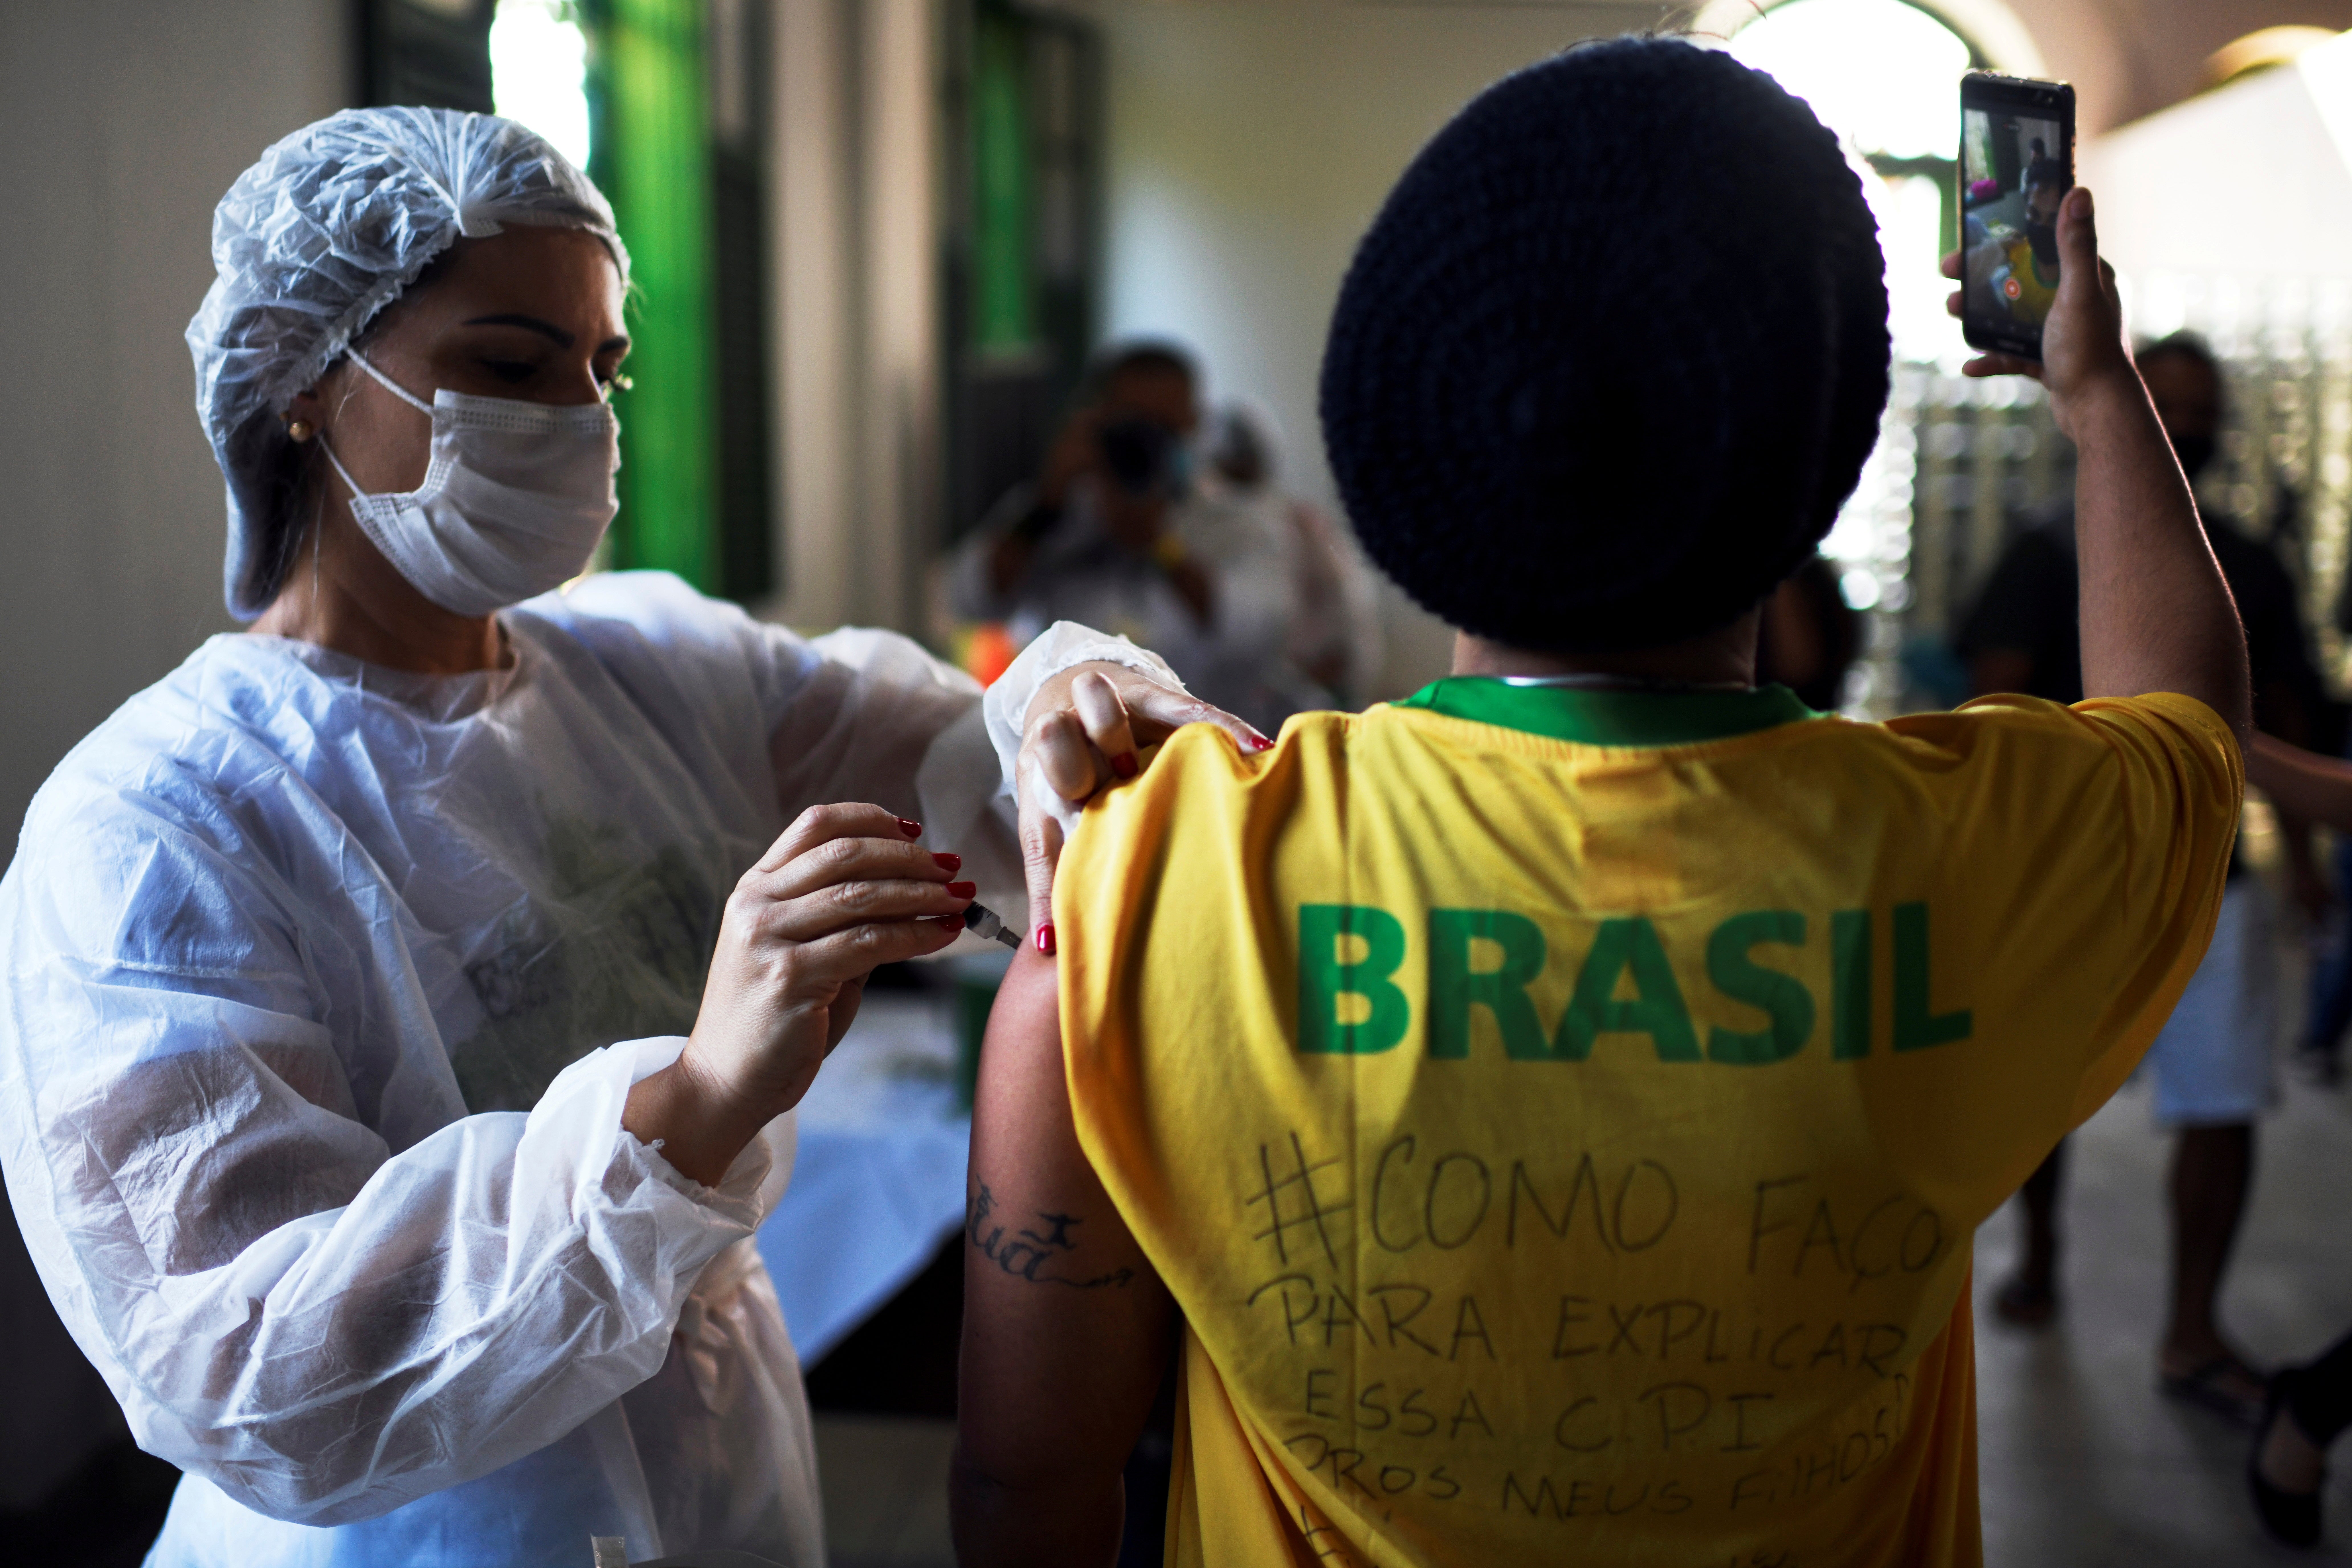 File: A health worker administers a Covid vaccine dose to a resident as he takes a selfie, during mass vaccination at the Ilha Grande island, one of the most famous tourist spots in Rio de Janeiro state, Brazil